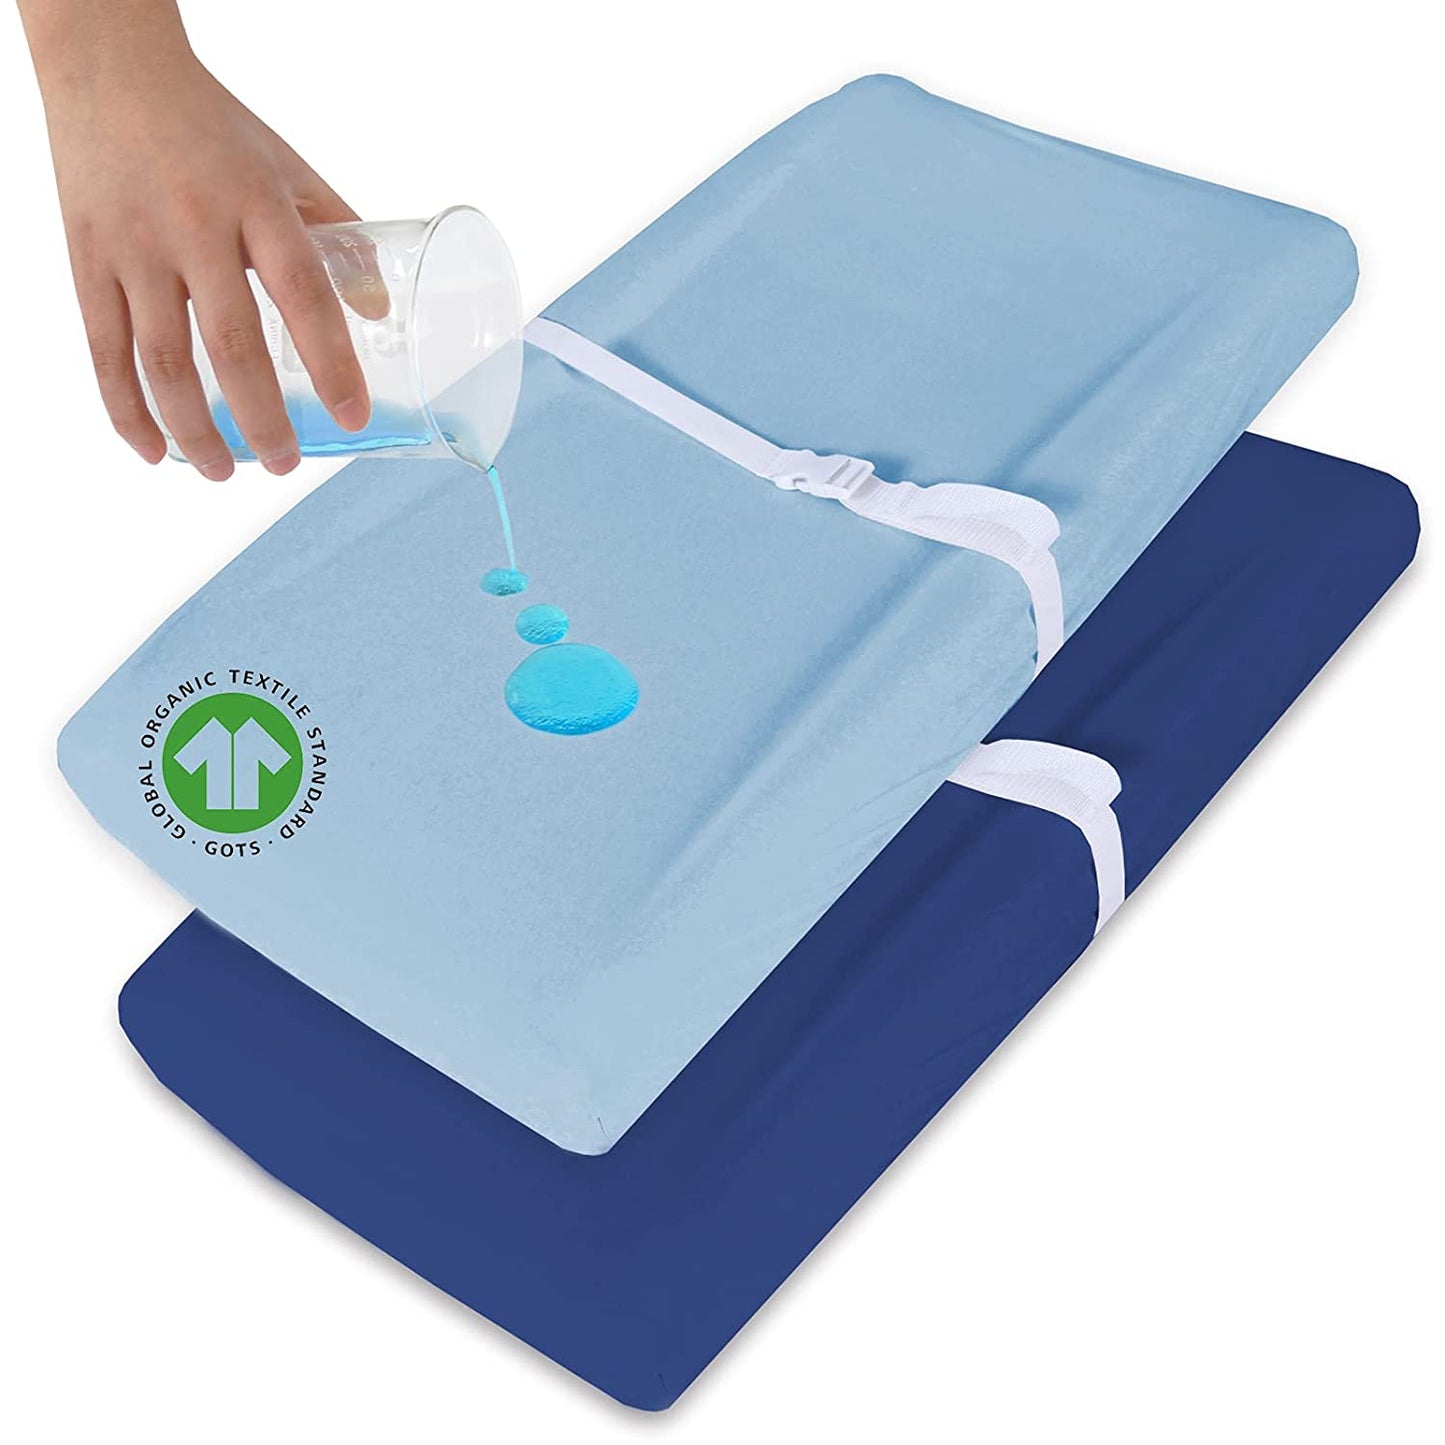 Changing Pad Cover - 2 Pack, Ultra Soft 100% Organic Cotton, Light Blue & Navy